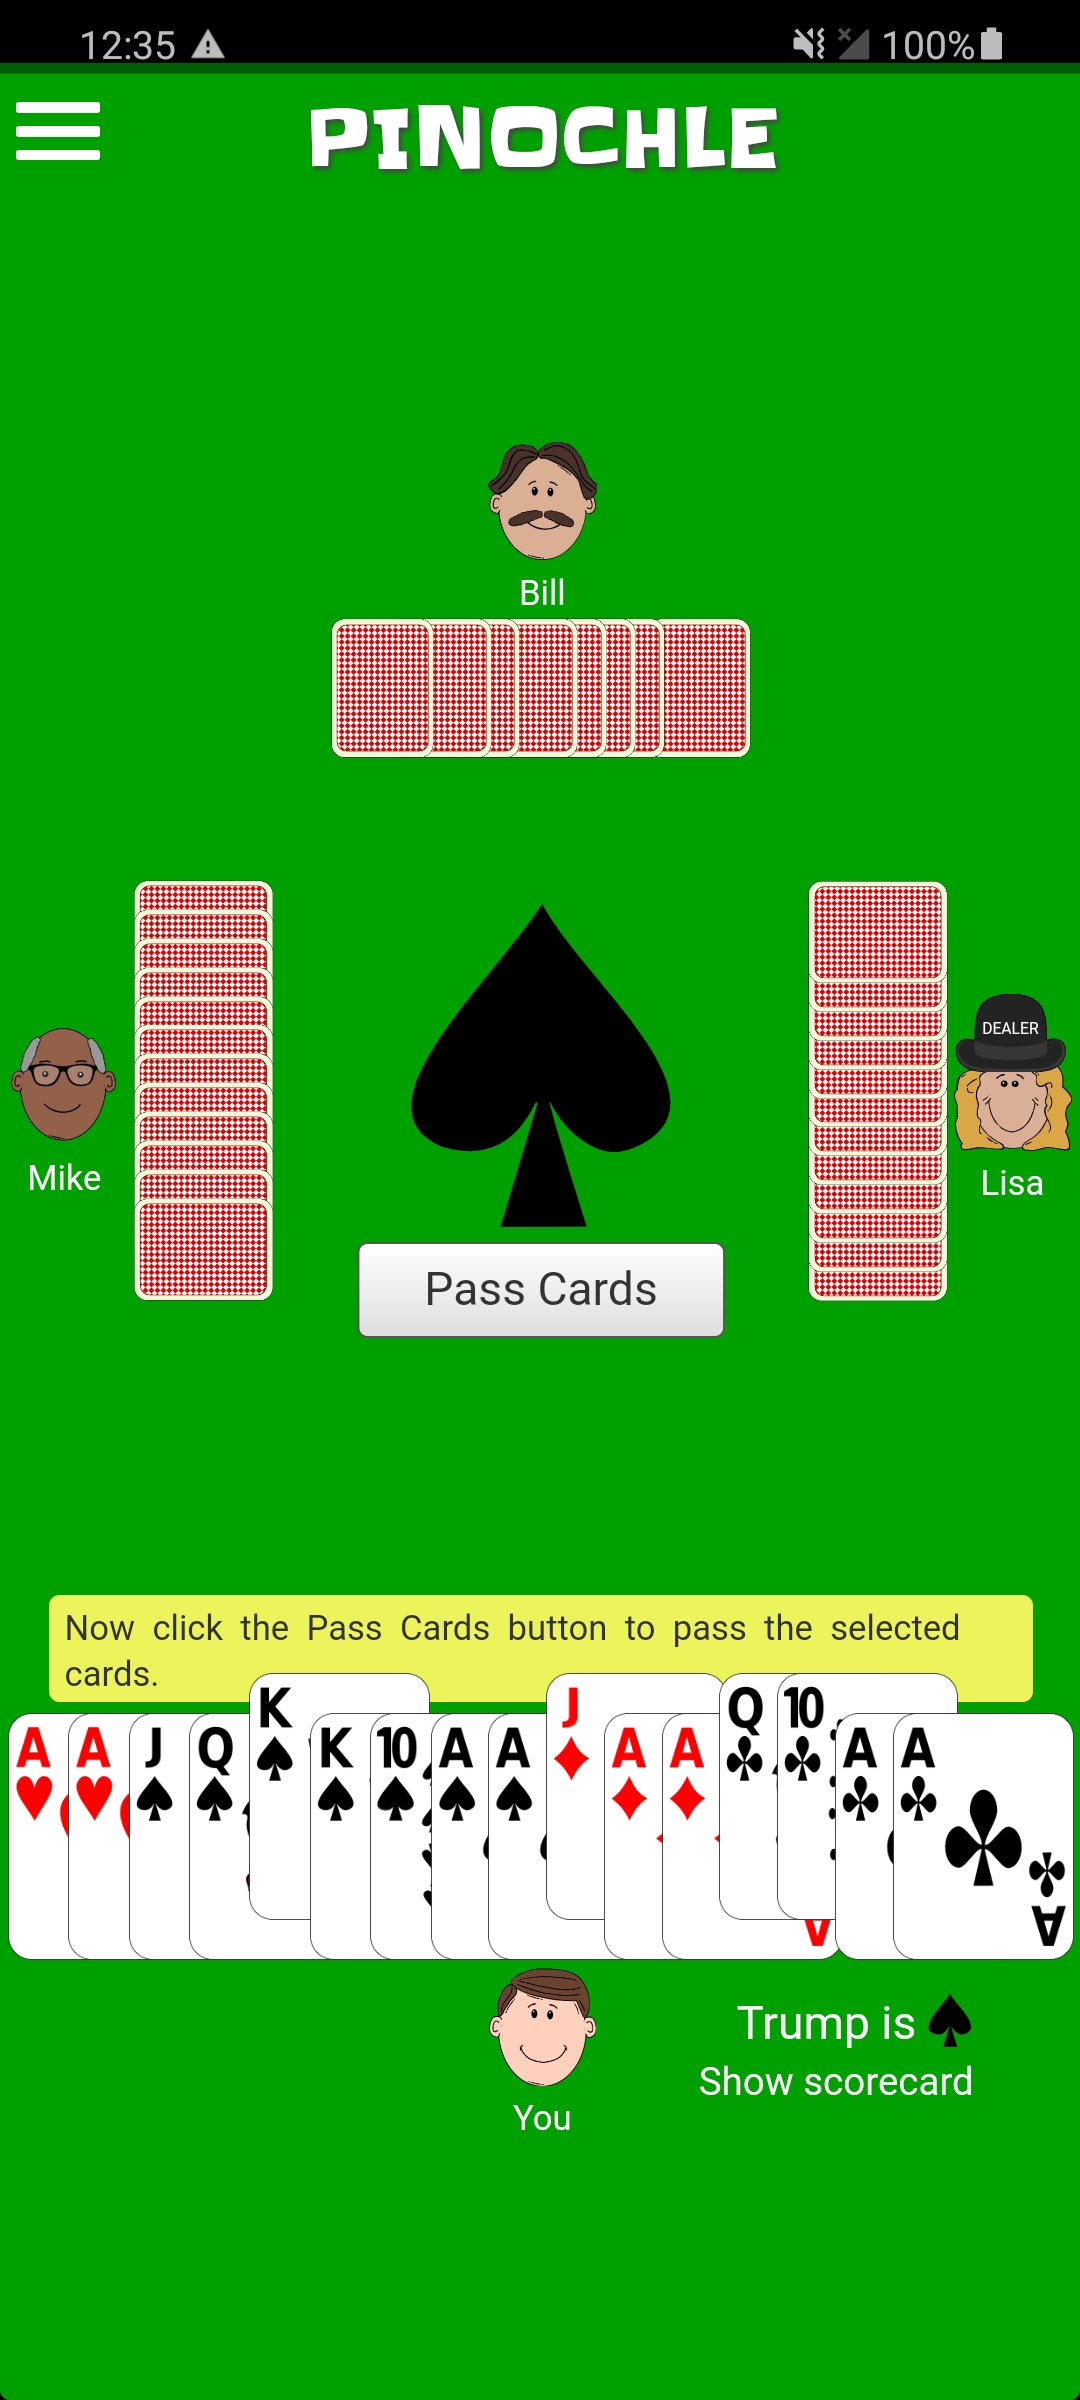 The story of CardGames.io